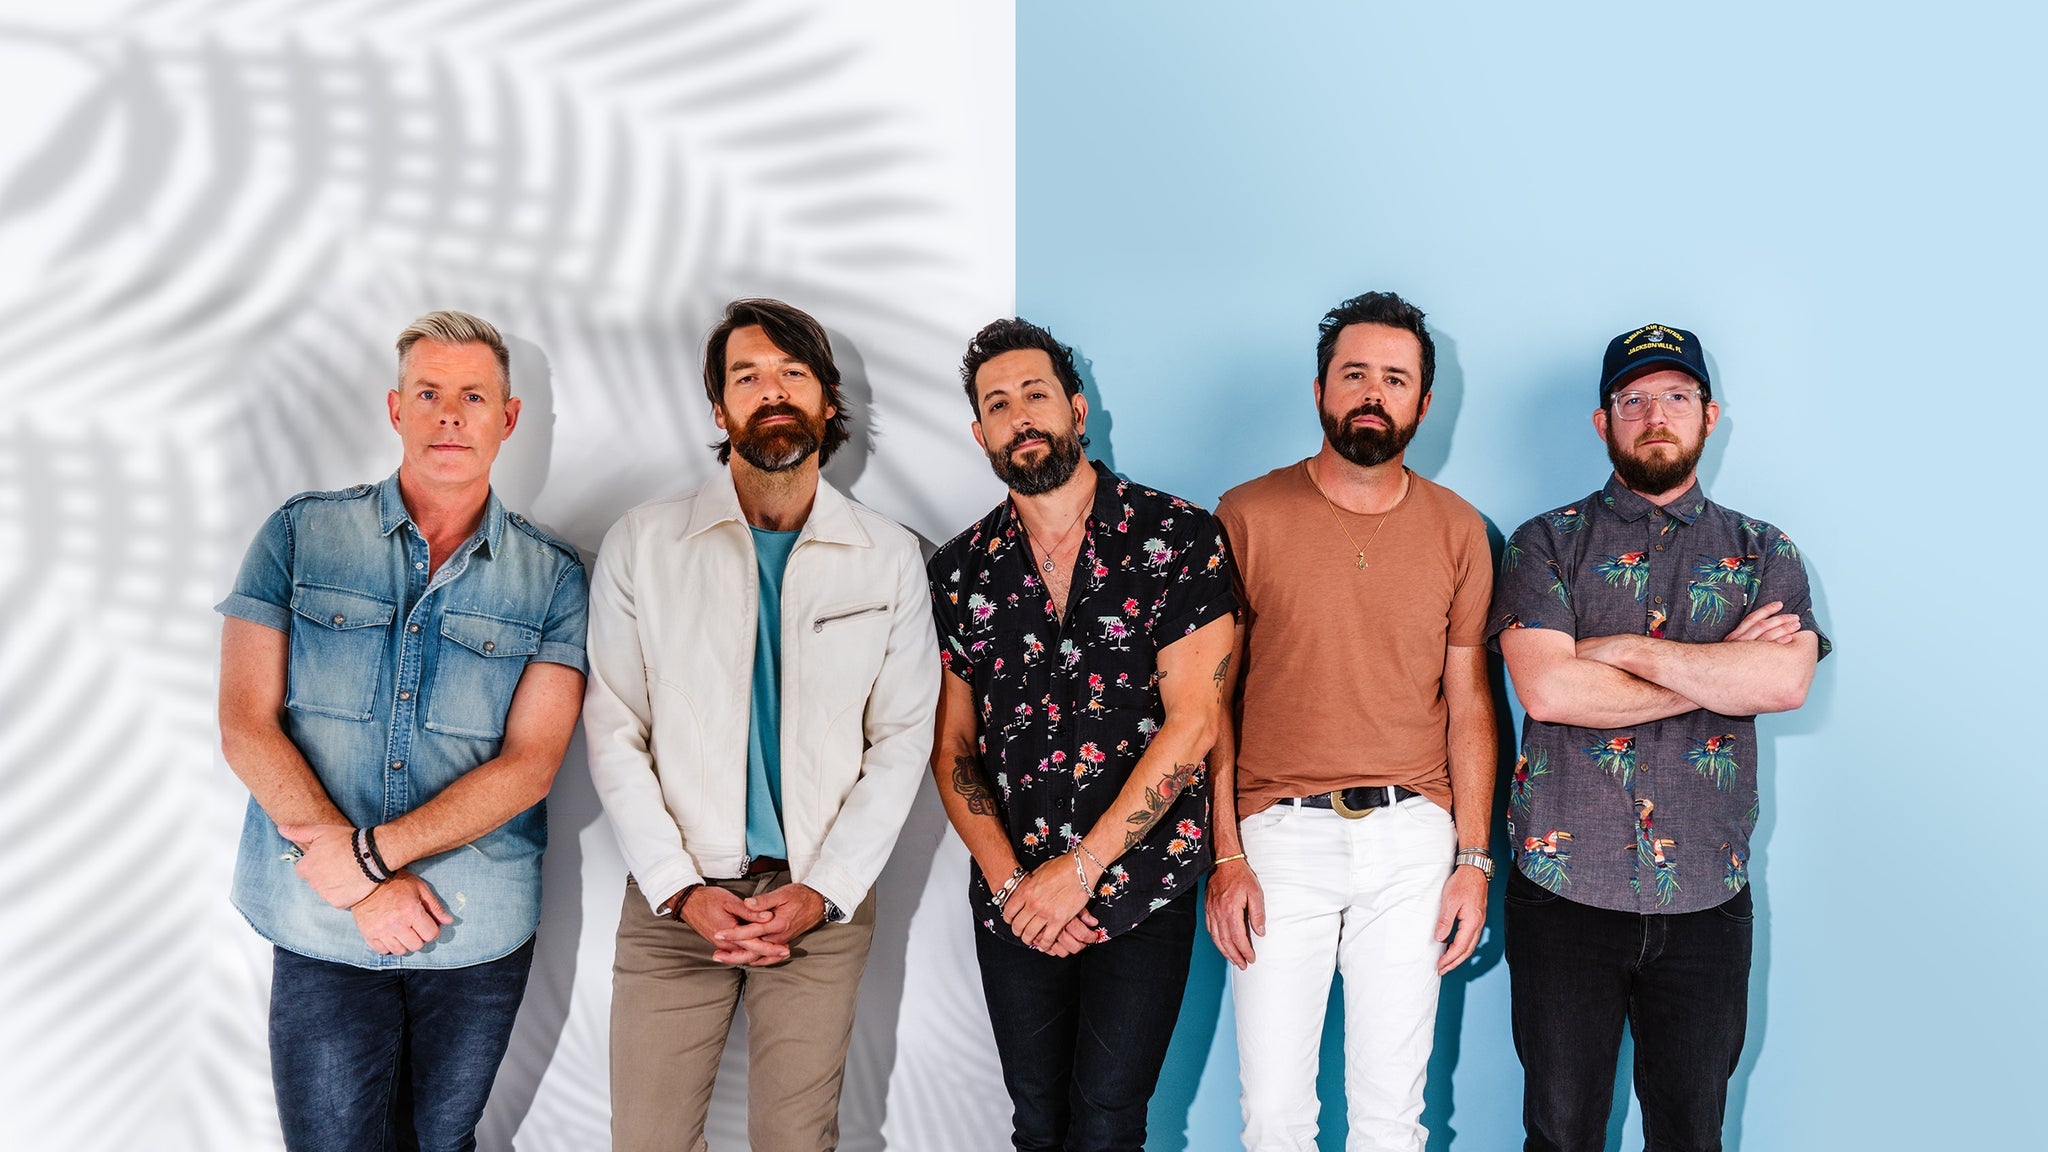 Old Dominion: No Bad Vibes Tour presale c0de for advance tickets in Stateline